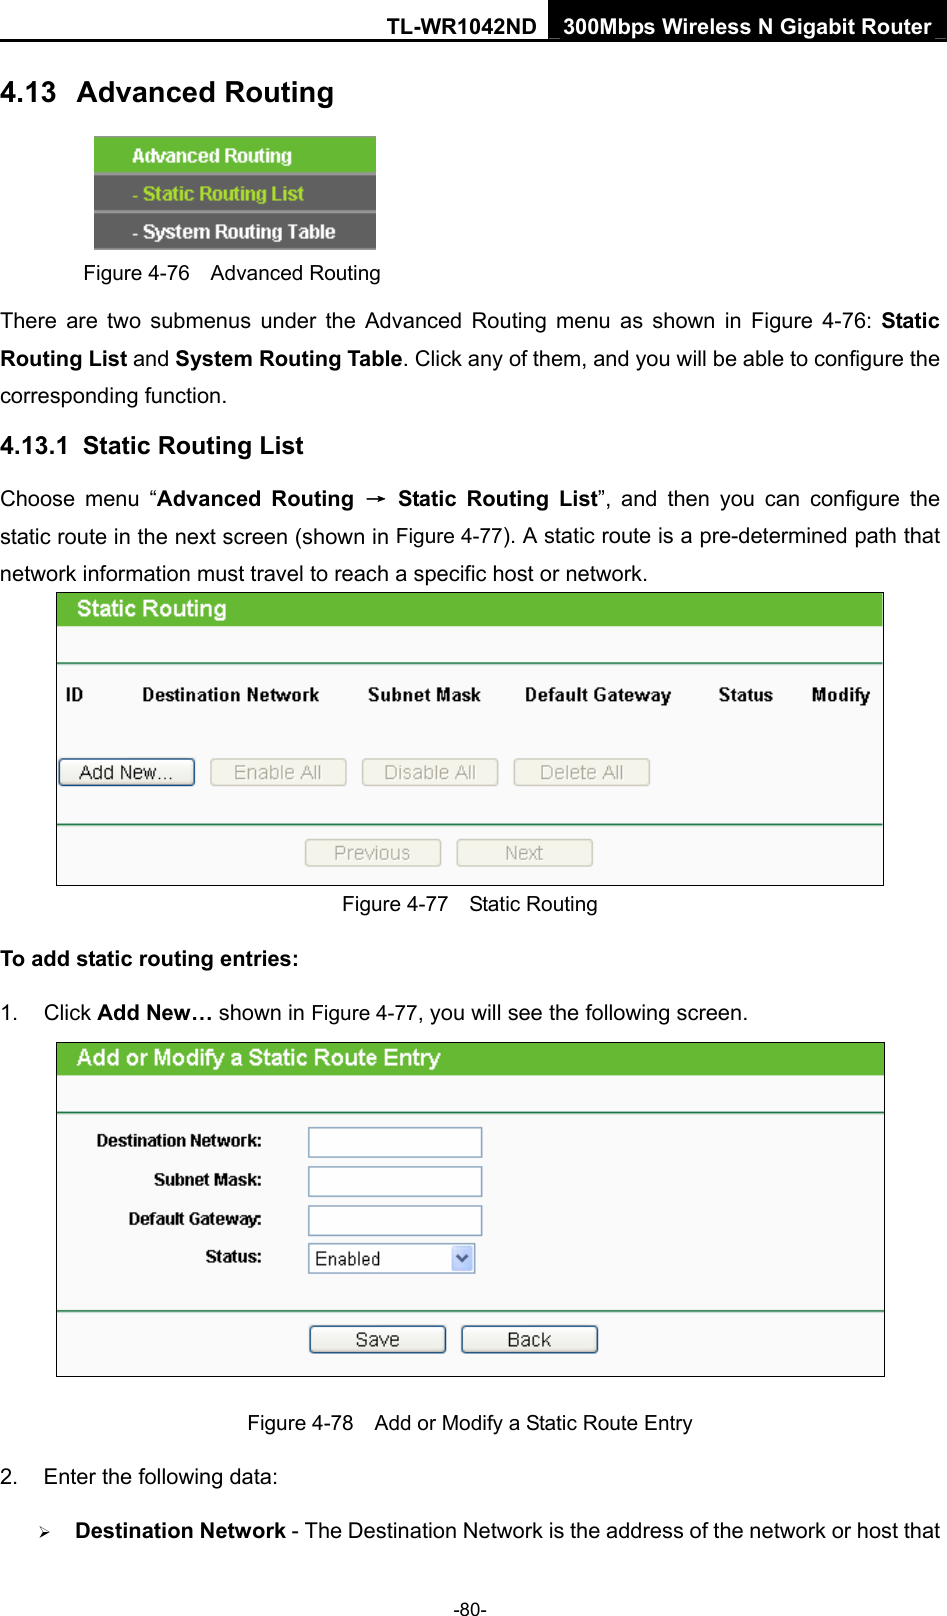 TL-WR1042ND 300Mbps Wireless N Gigabit Router -80- 4.13  Advanced Routing  Figure 4-76  Advanced Routing There are two submenus under the Advanced Routing menu as shown in Figure 4-76: Static Routing List and System Routing Table. Click any of them, and you will be able to configure the corresponding function. 4.13.1  Static Routing List Choose menu “Advanced Routing → Static Routing List”, and then you can configure the static route in the next screen (shown in Figure 4-77). A static route is a pre-determined path that network information must travel to reach a specific host or network.  Figure 4-77  Static Routing To add static routing entries: 1. Click Add New… shown in Figure 4-77, you will see the following screen.  Figure 4-78    Add or Modify a Static Route Entry 2.  Enter the following data: ¾ Destination Network - The Destination Network is the address of the network or host that 